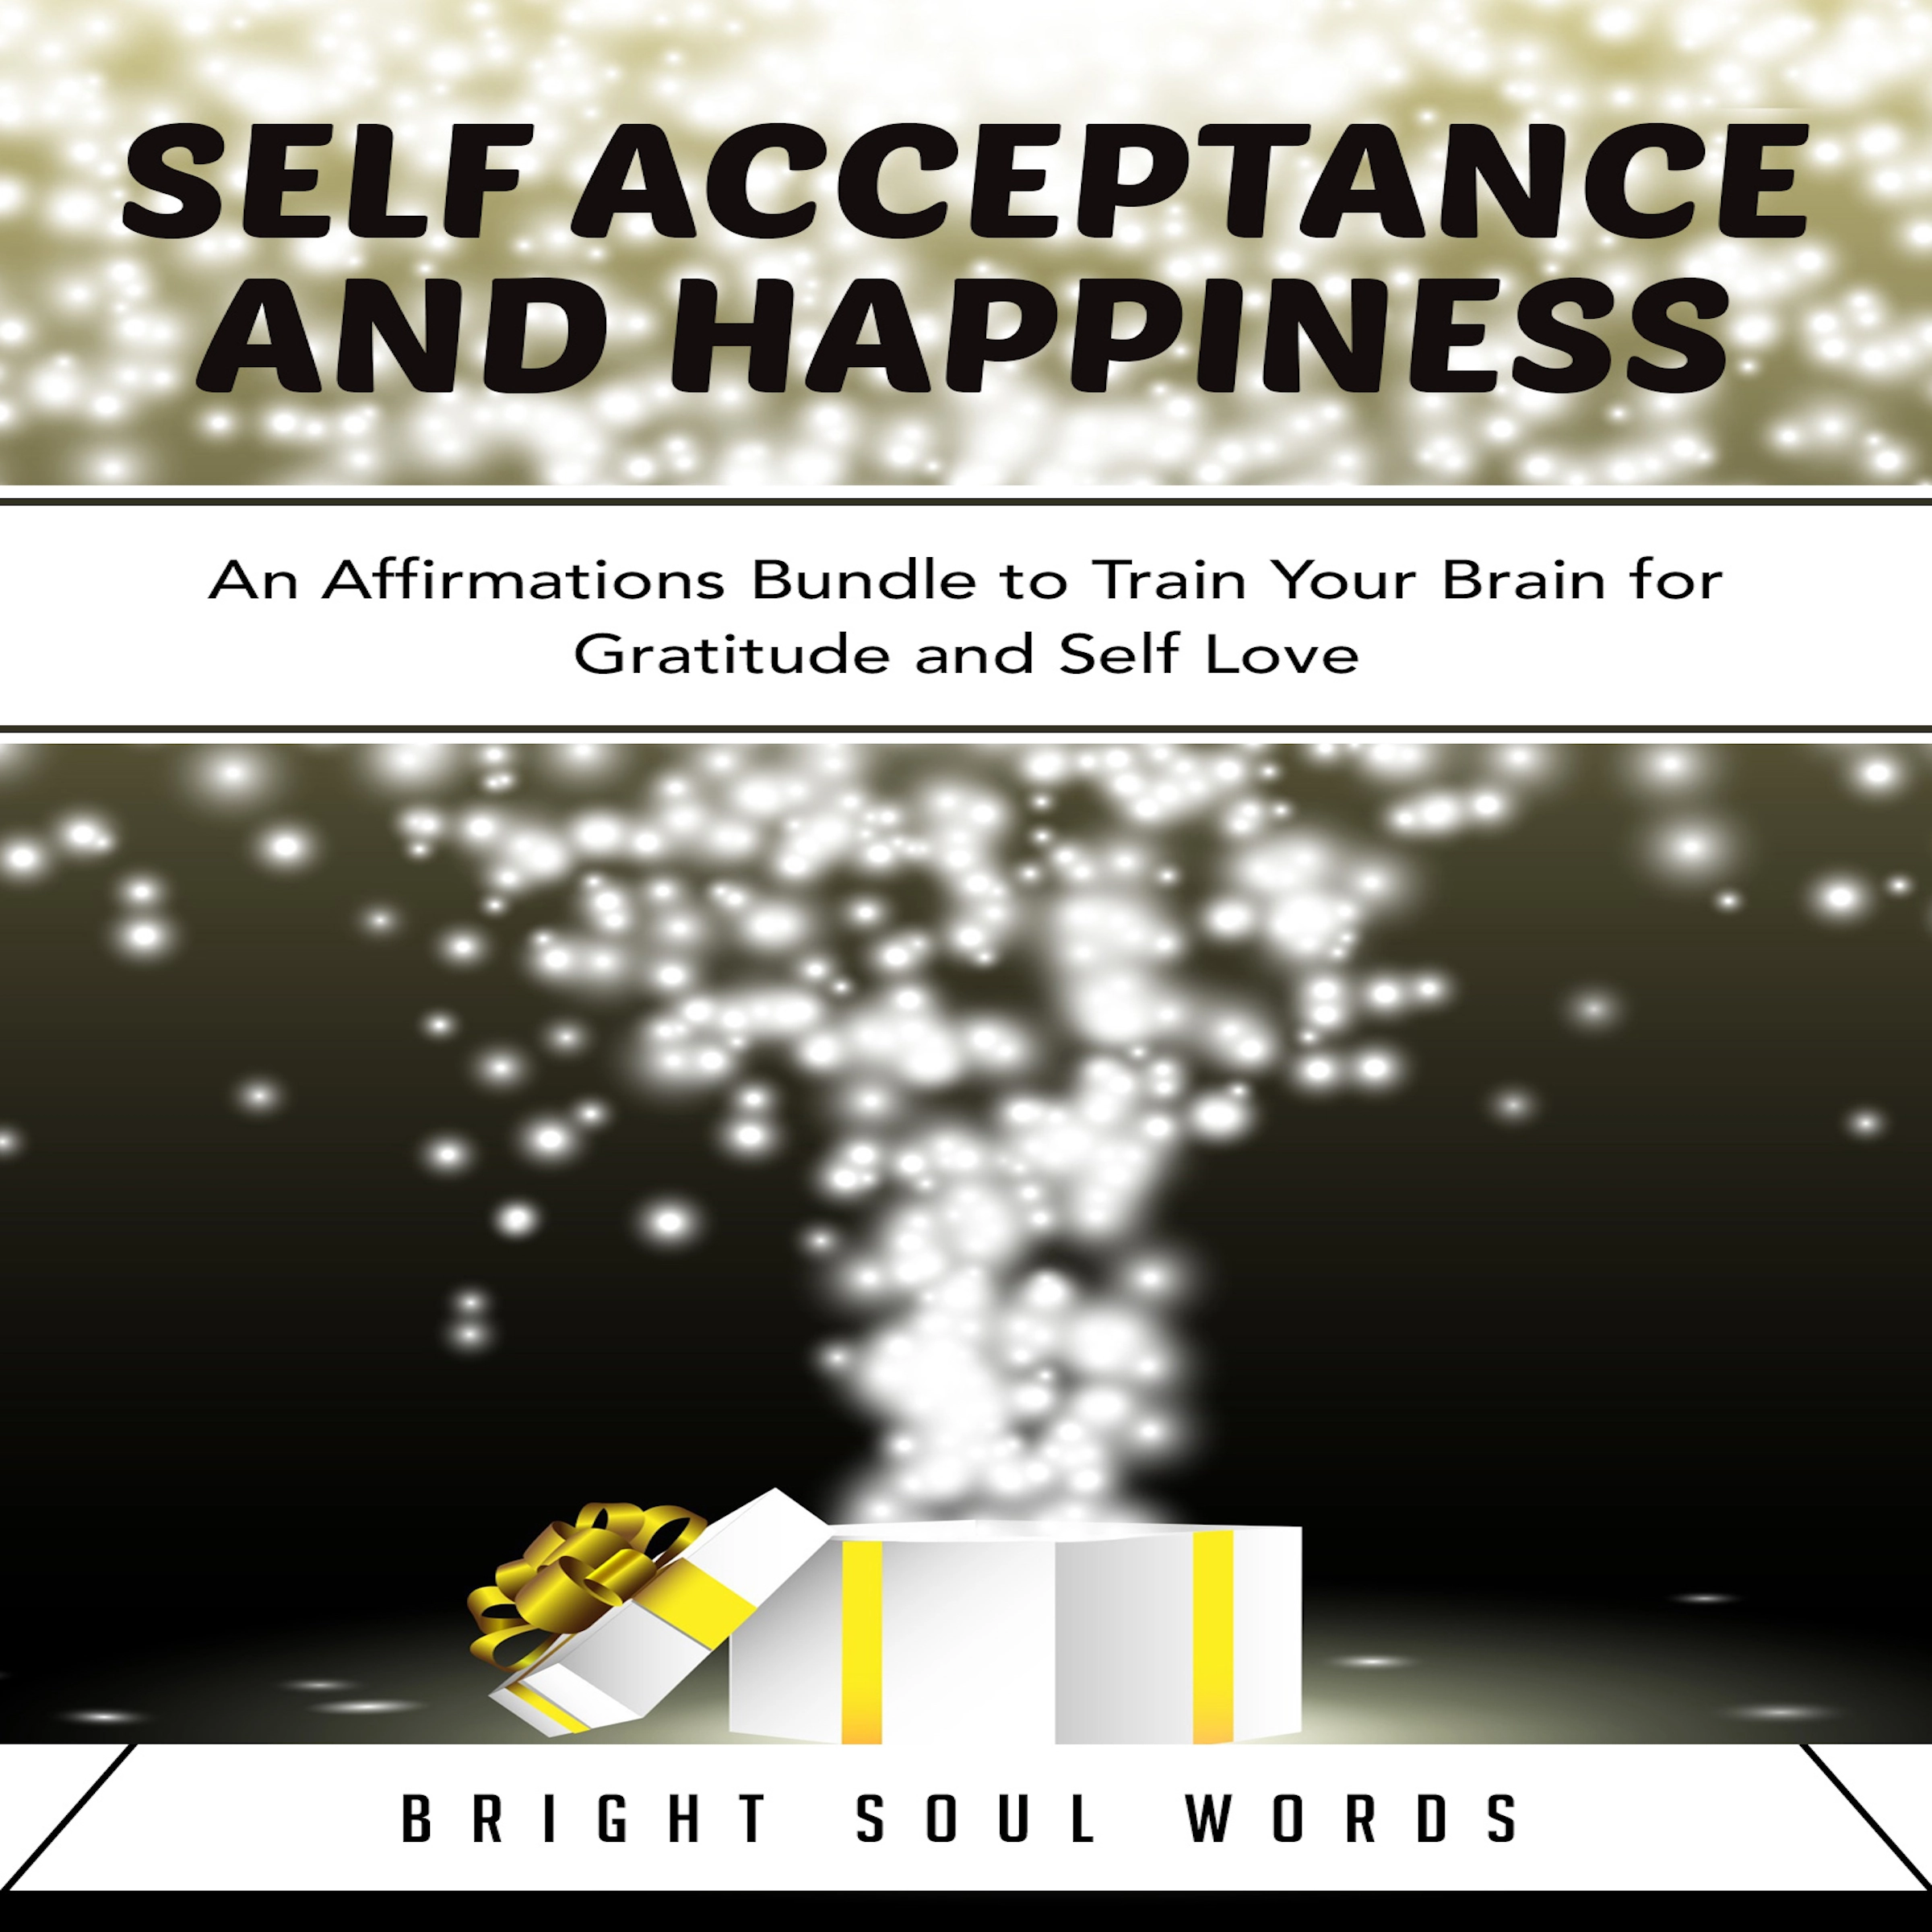 Self Acceptance and Happiness: An Affirmations Bundle to Train Your Brain for Gratitude and Self Love Audiobook by Bright Soul Words